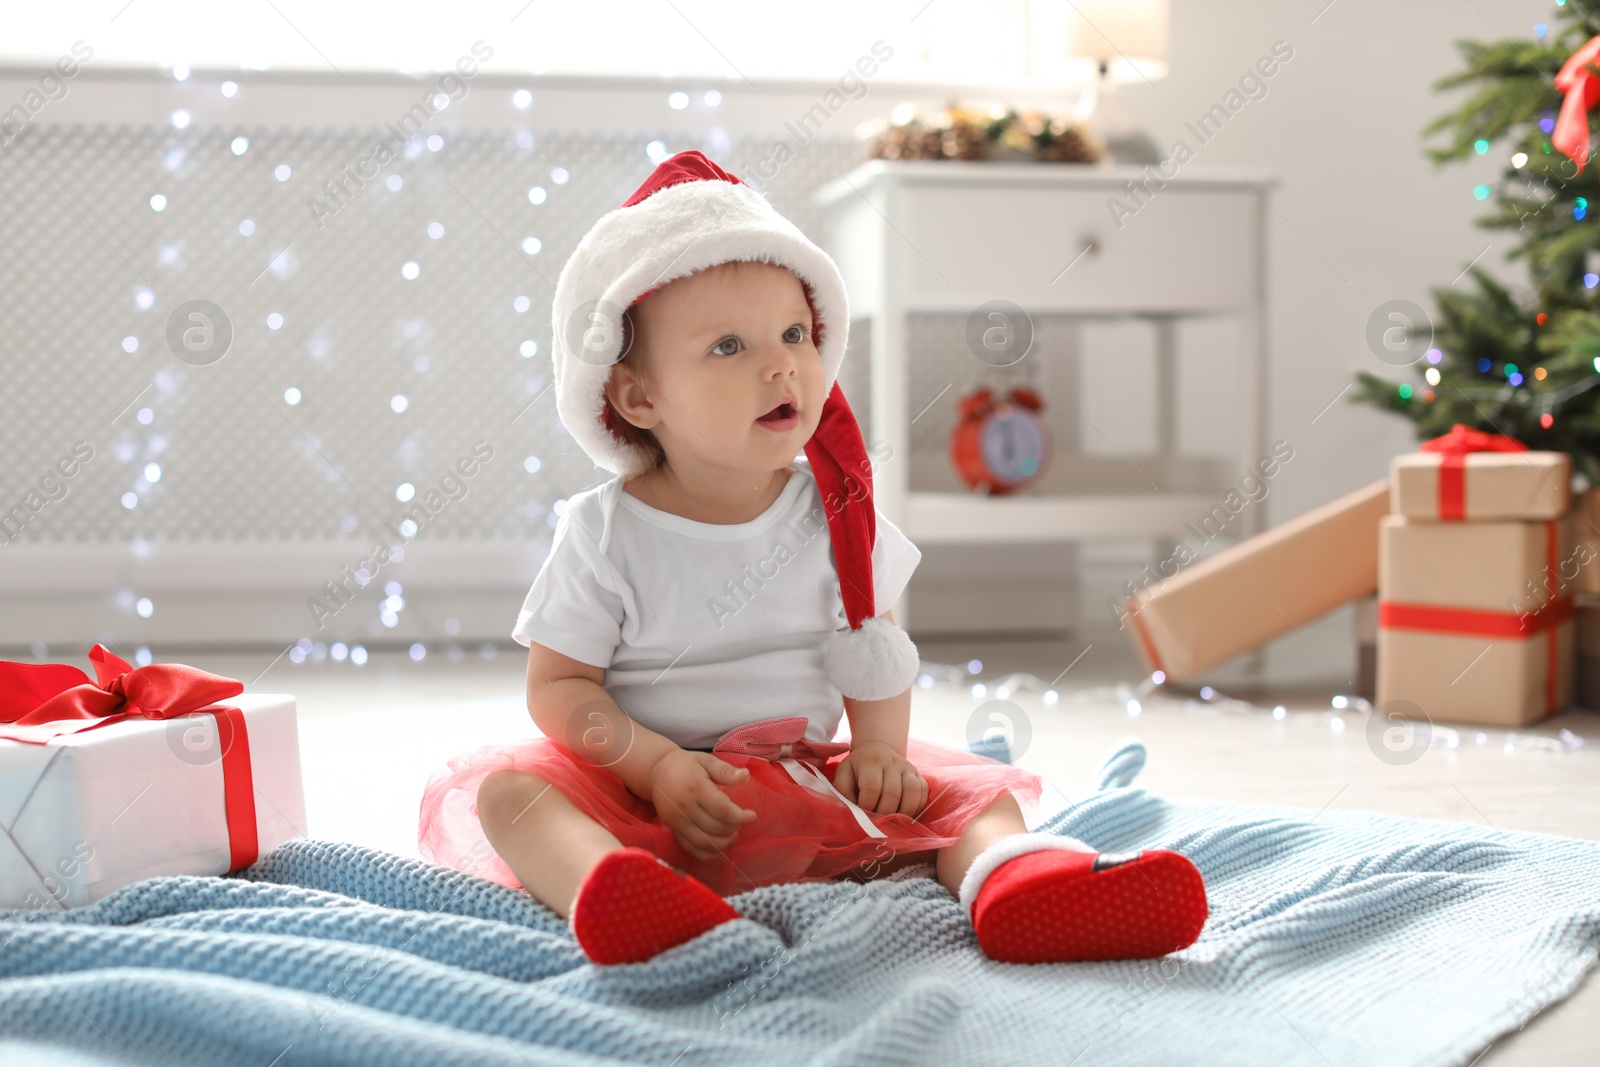 Photo of Cute baby in Christmas costume on floor at home